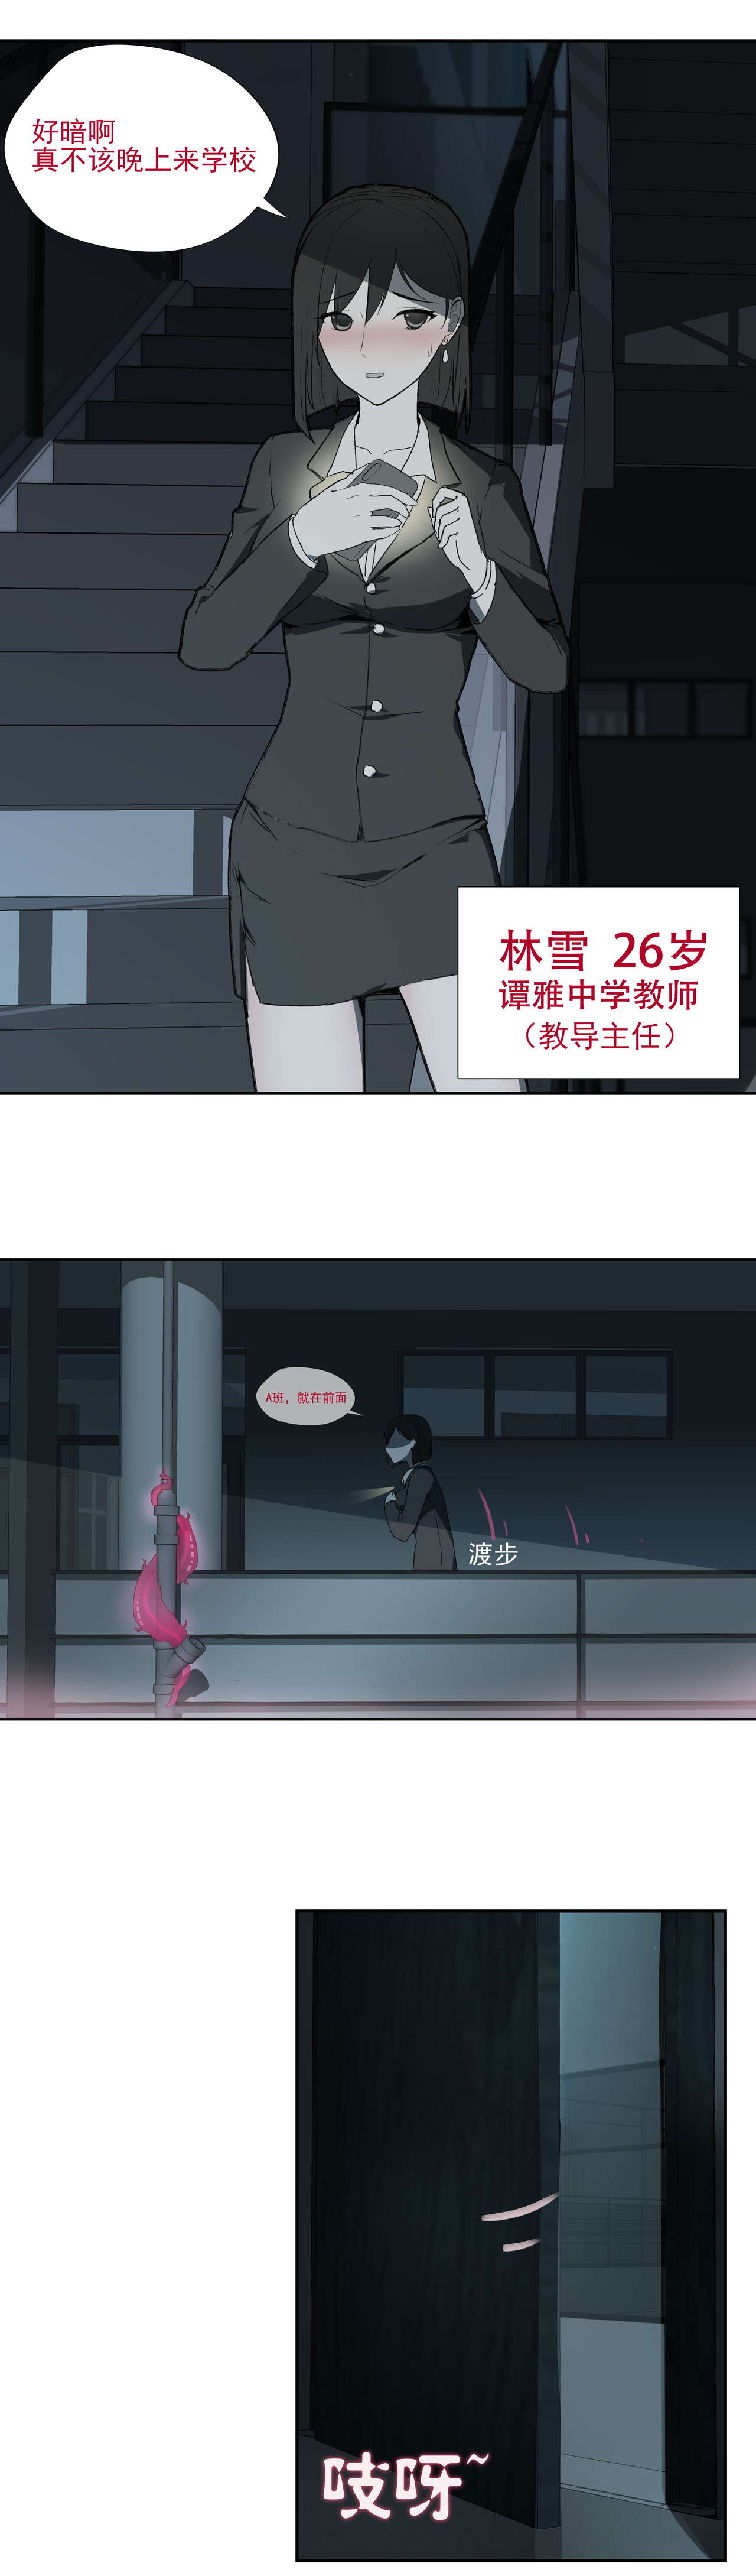 [7T-黑夜的光] 寄生之恋 Tentacle love [Chinese] page 2 full